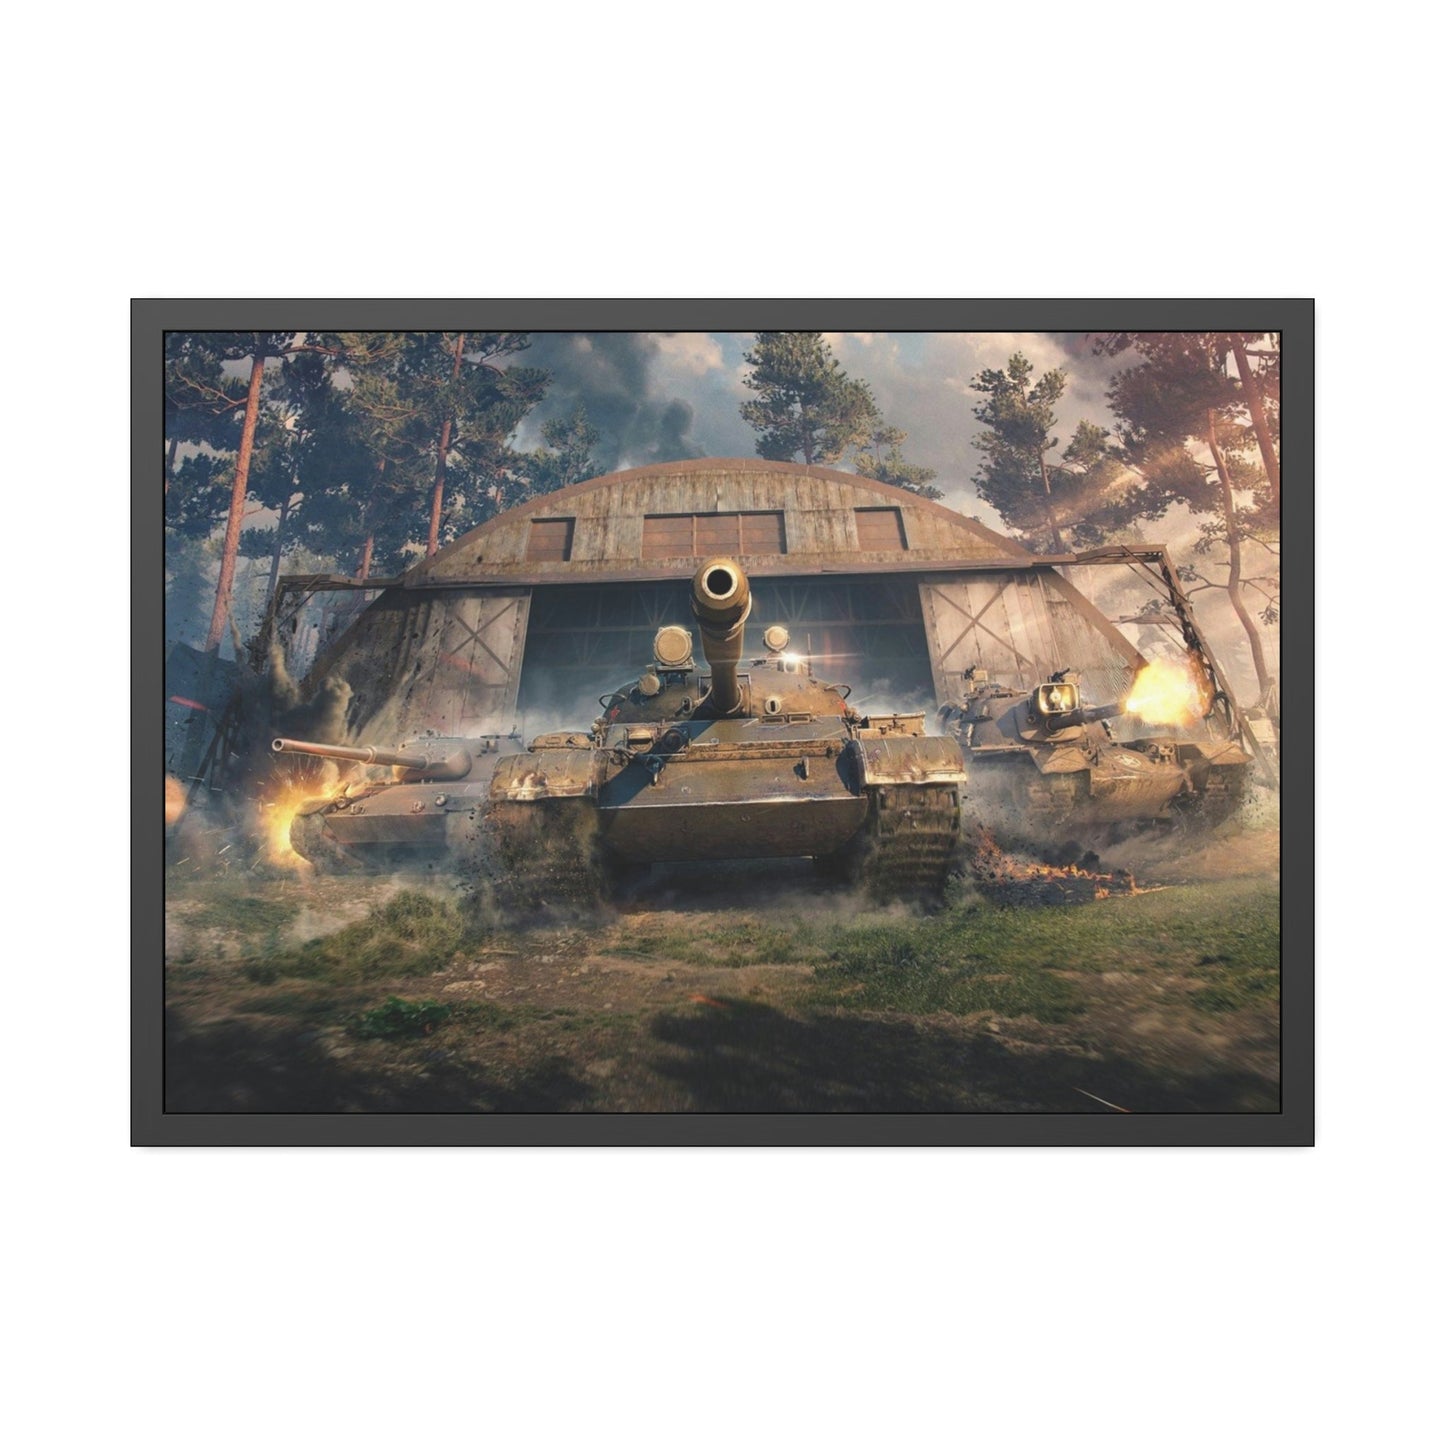 Steel Titans Clash: World of Tanks Сanvas Wall Art for Your Space